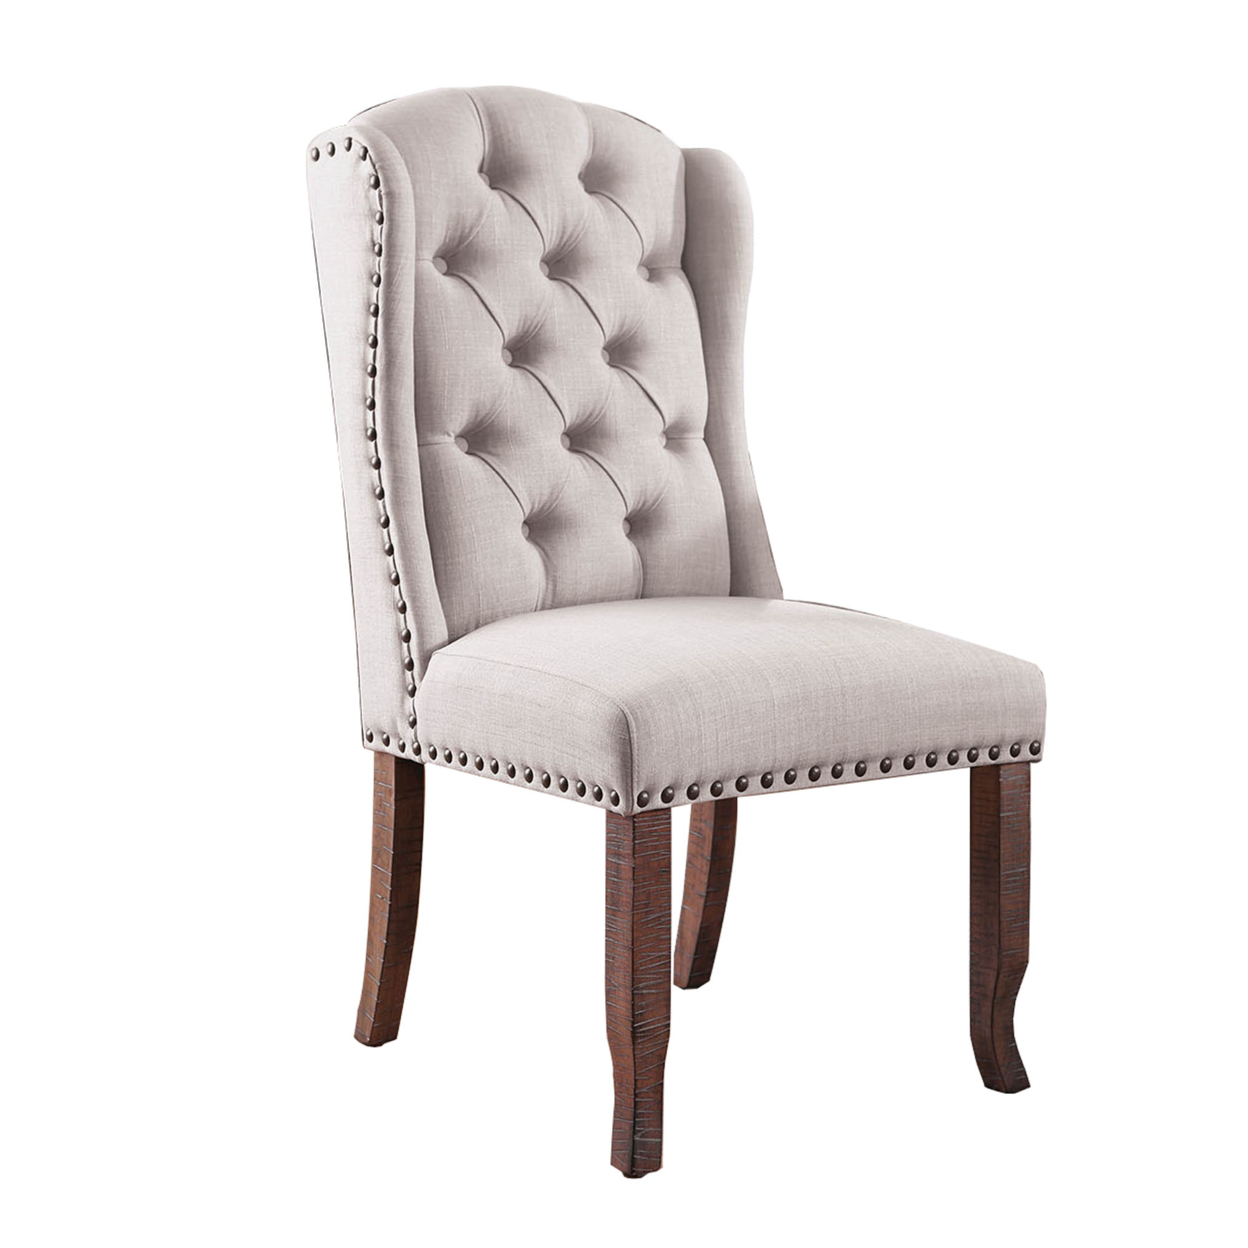 Button Tufted Fabric Upholstery Wingback Chair, Cream And Brown, Pack Of Two- Saltoro Sherpi